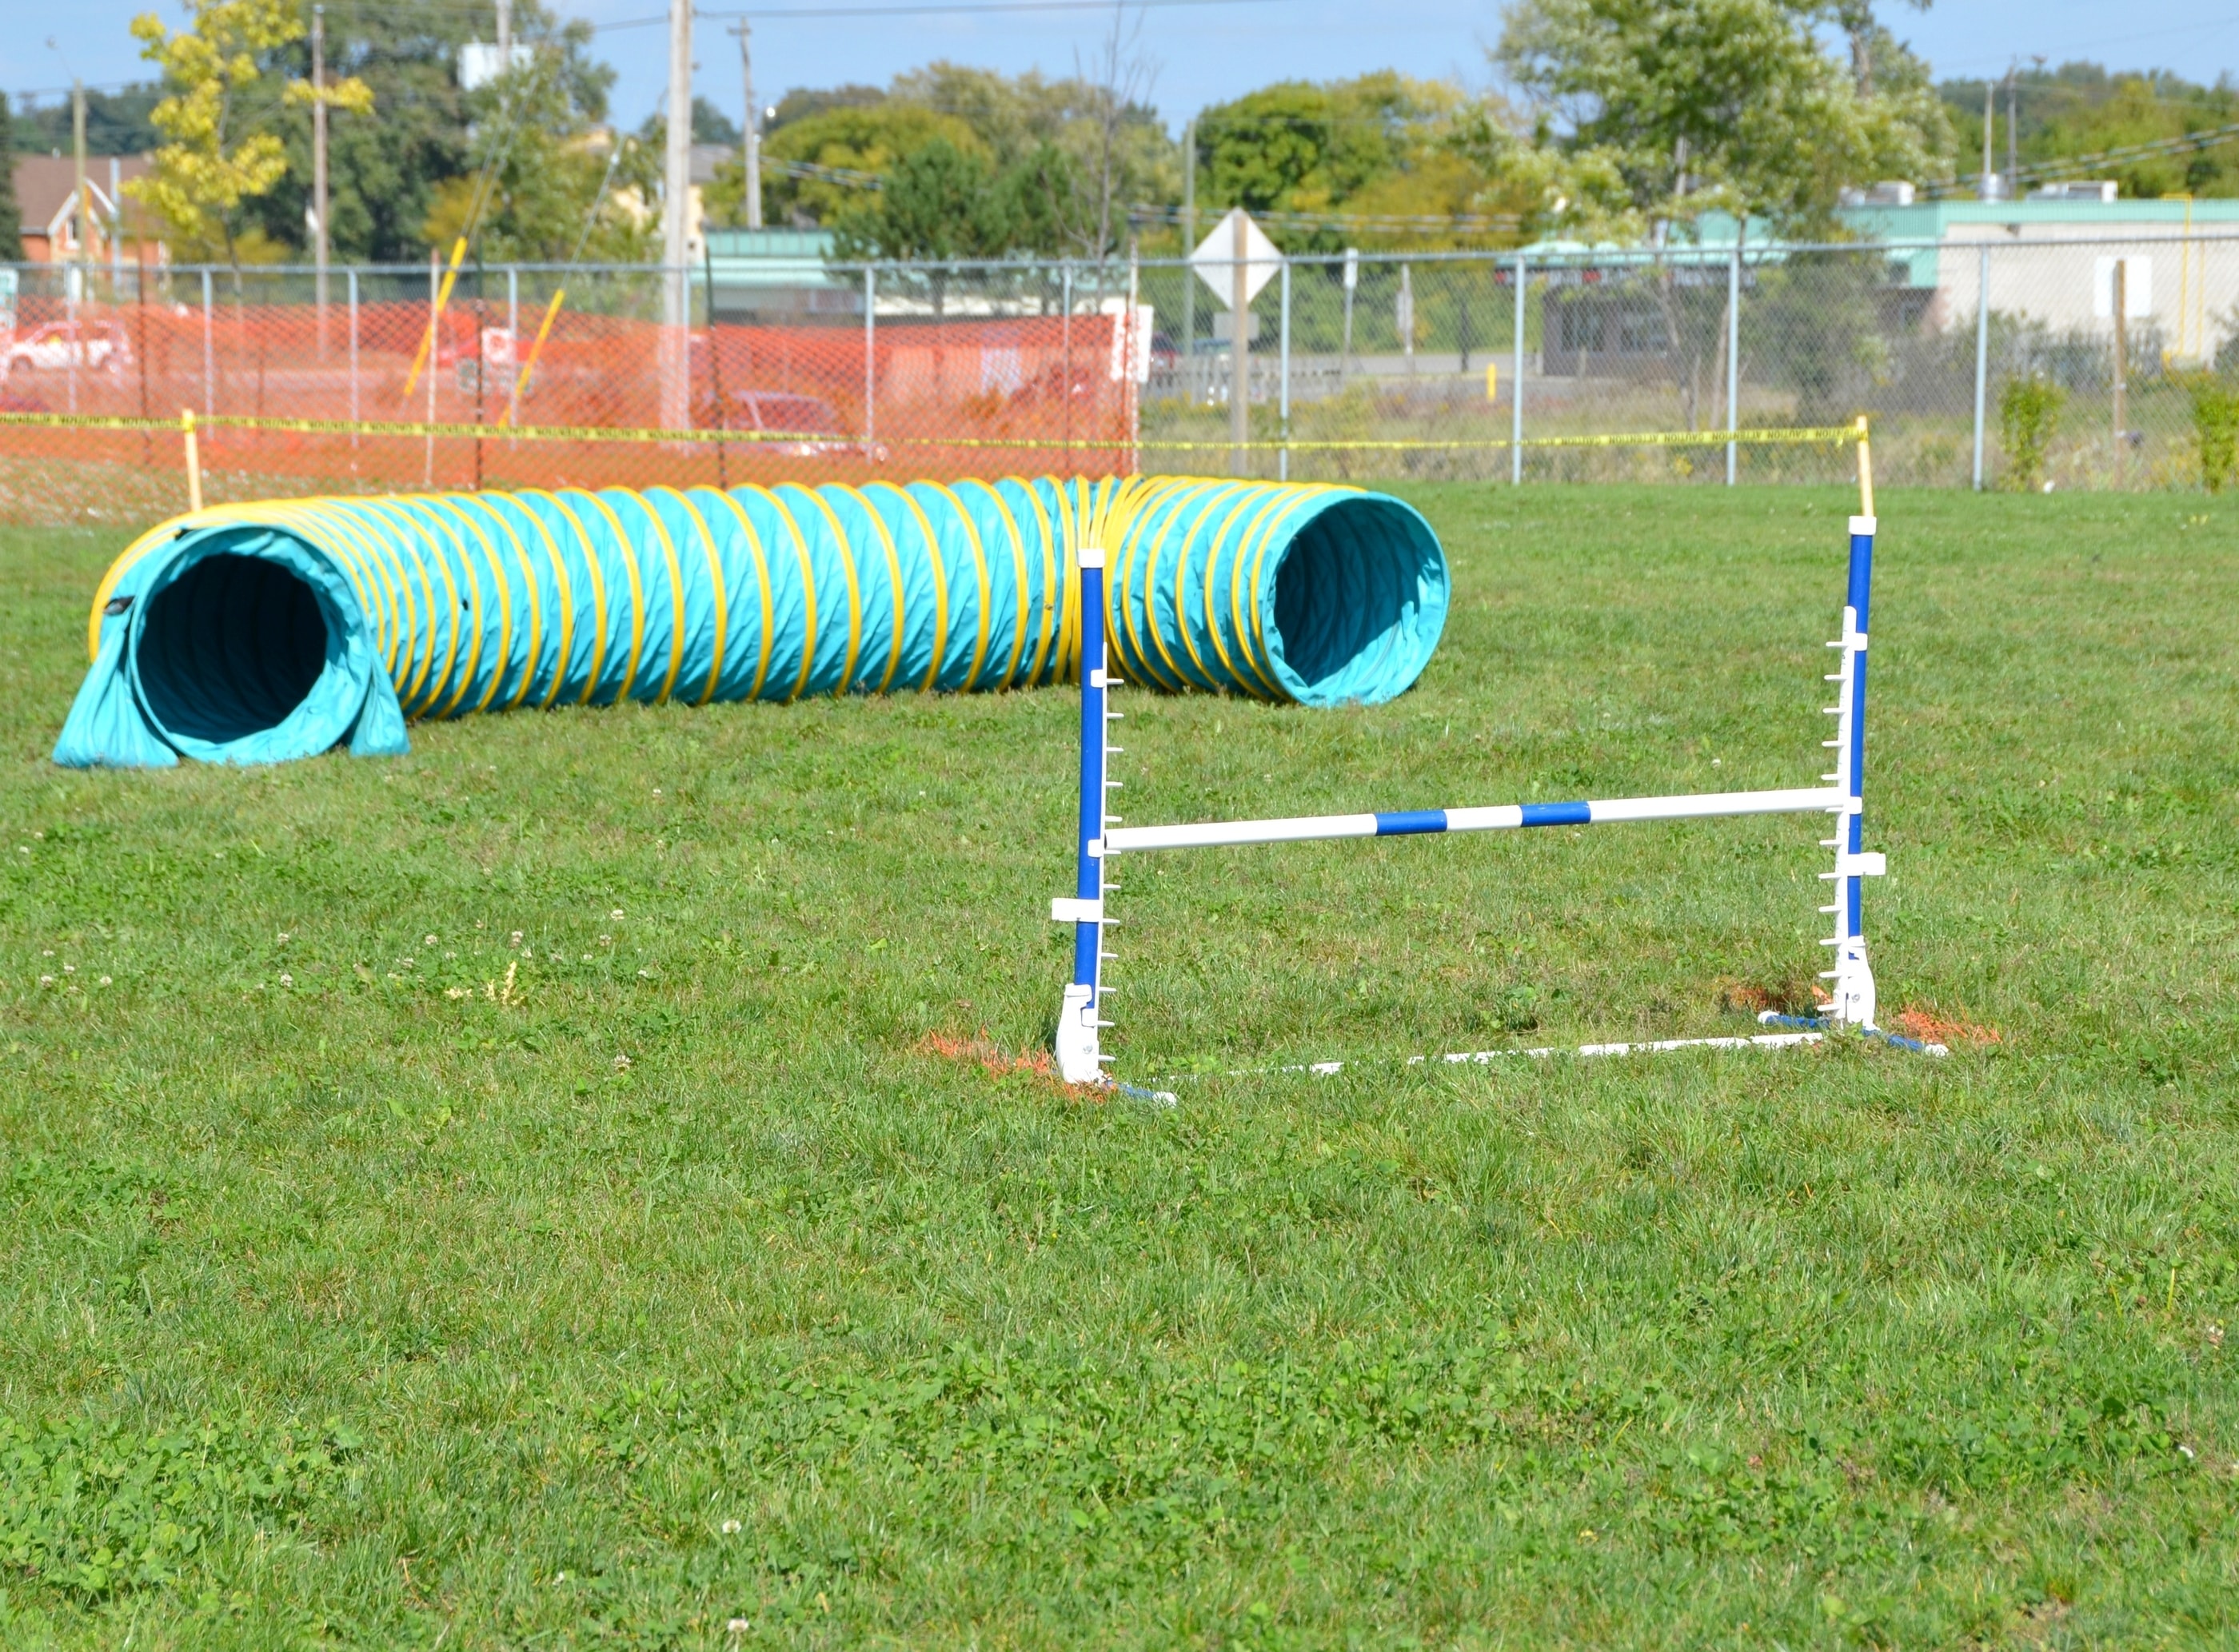 How to Train Your Dog to Run an Obstacle Course